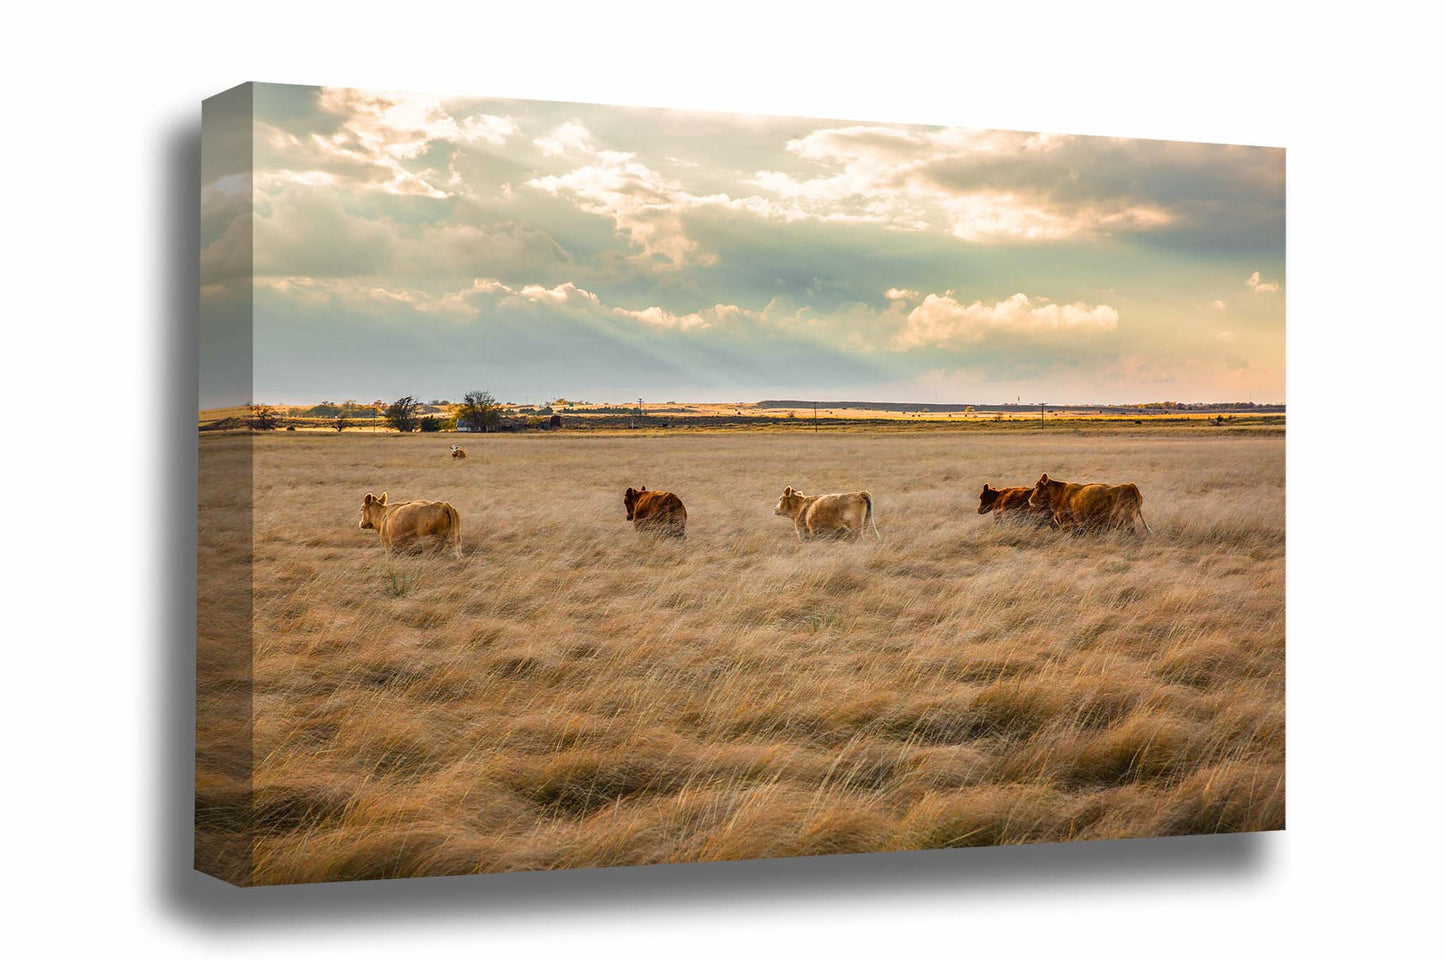 Western canvas wall art of cows wading through tall prairie grass on an autumn evening in the Texas panhandle by Sean Ramsey of Southern Plains Photography.